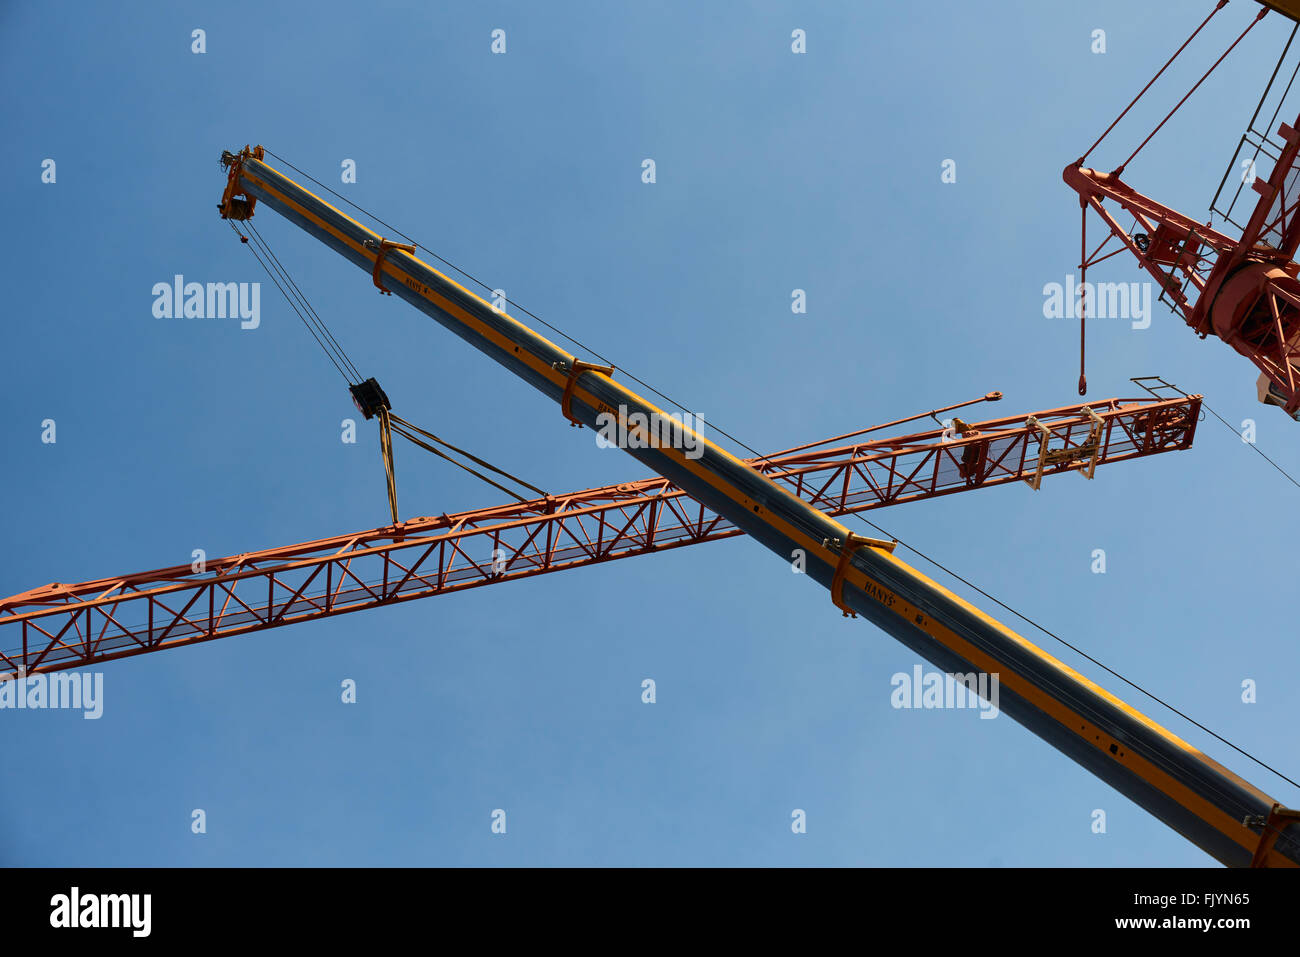 Construction worker dismantling tower crane Stock Photo